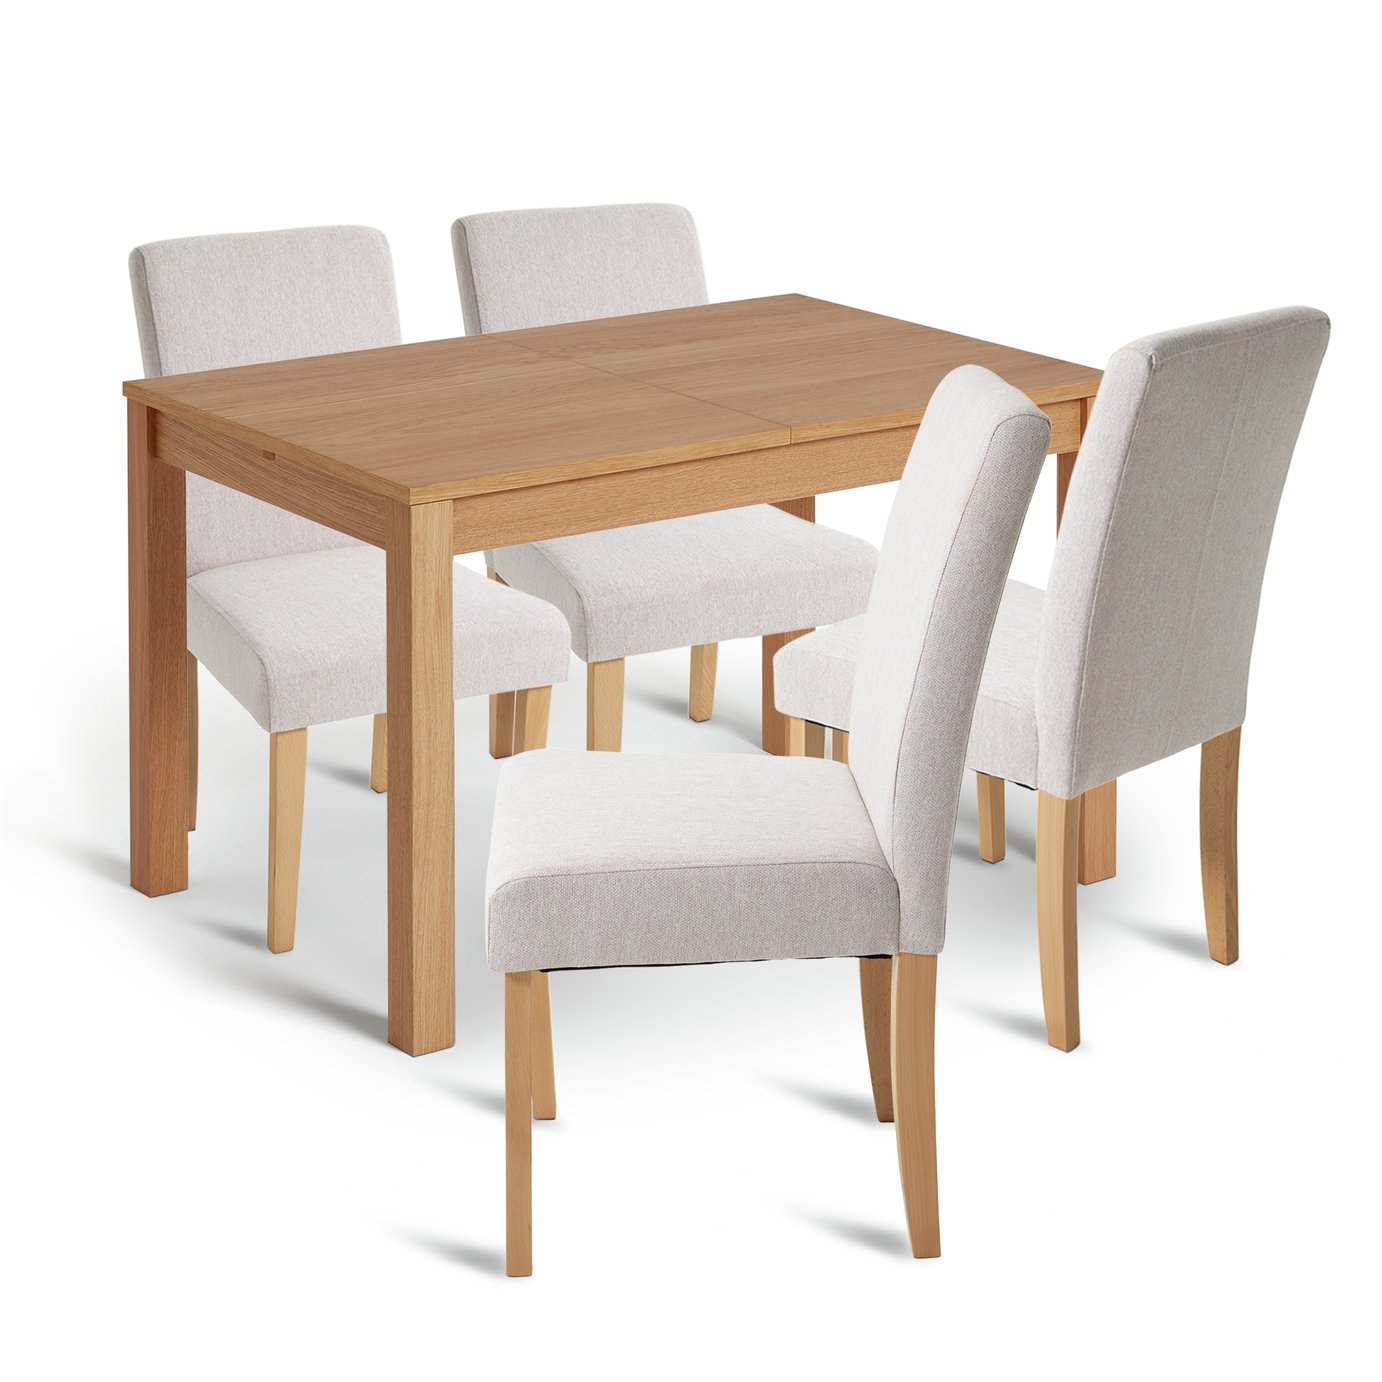 Habitat Clifton Wood Extending Dining Table & 4 Cream Chairs